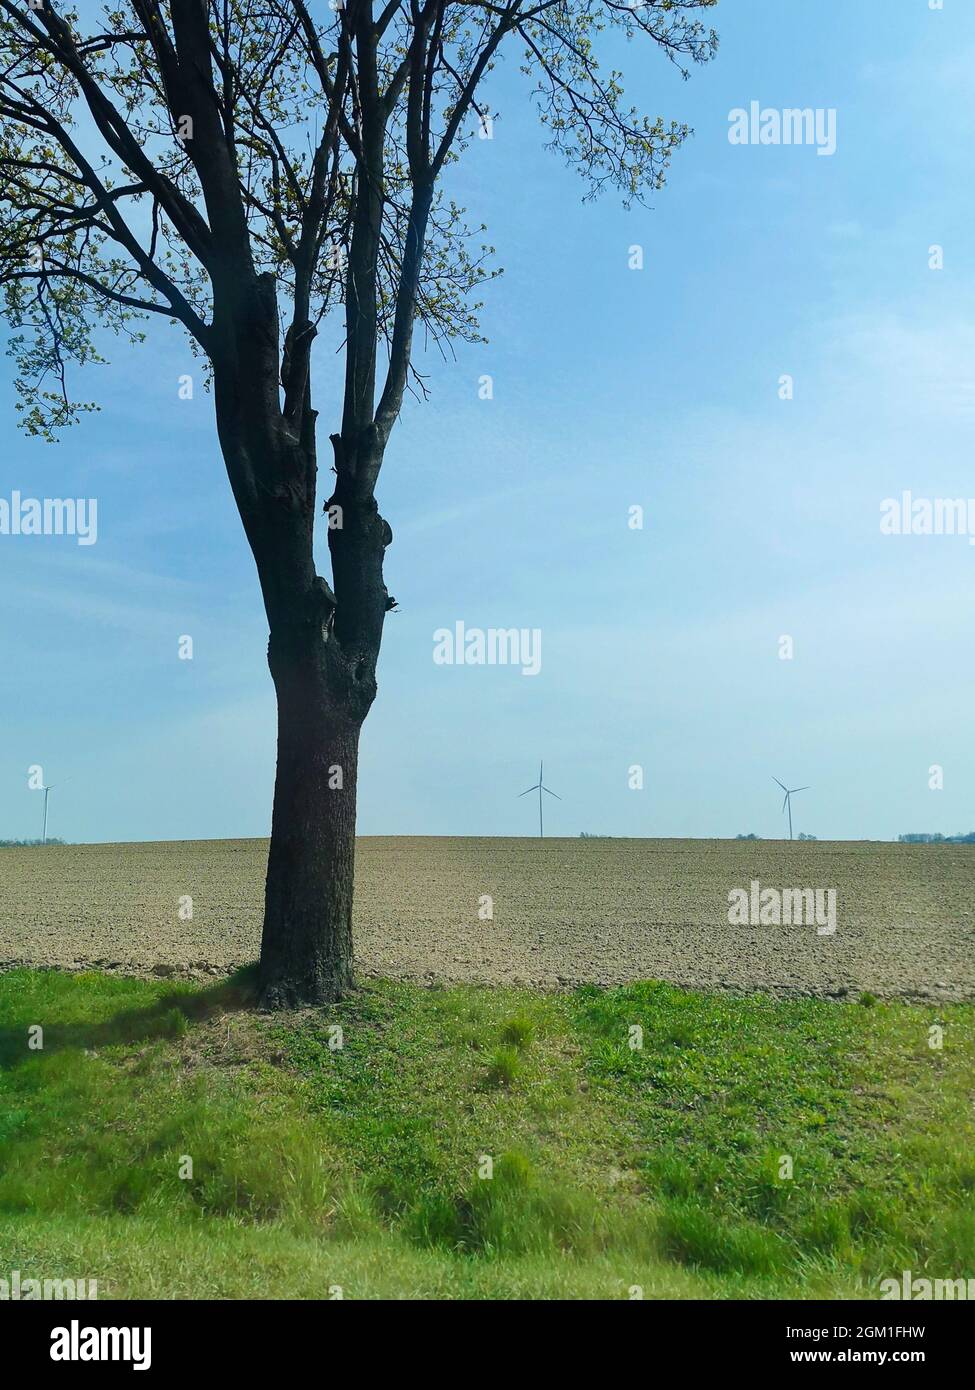 A single tree in a field, blue sky, green grass and windmills in the background in the sunny warm day Stock Photo